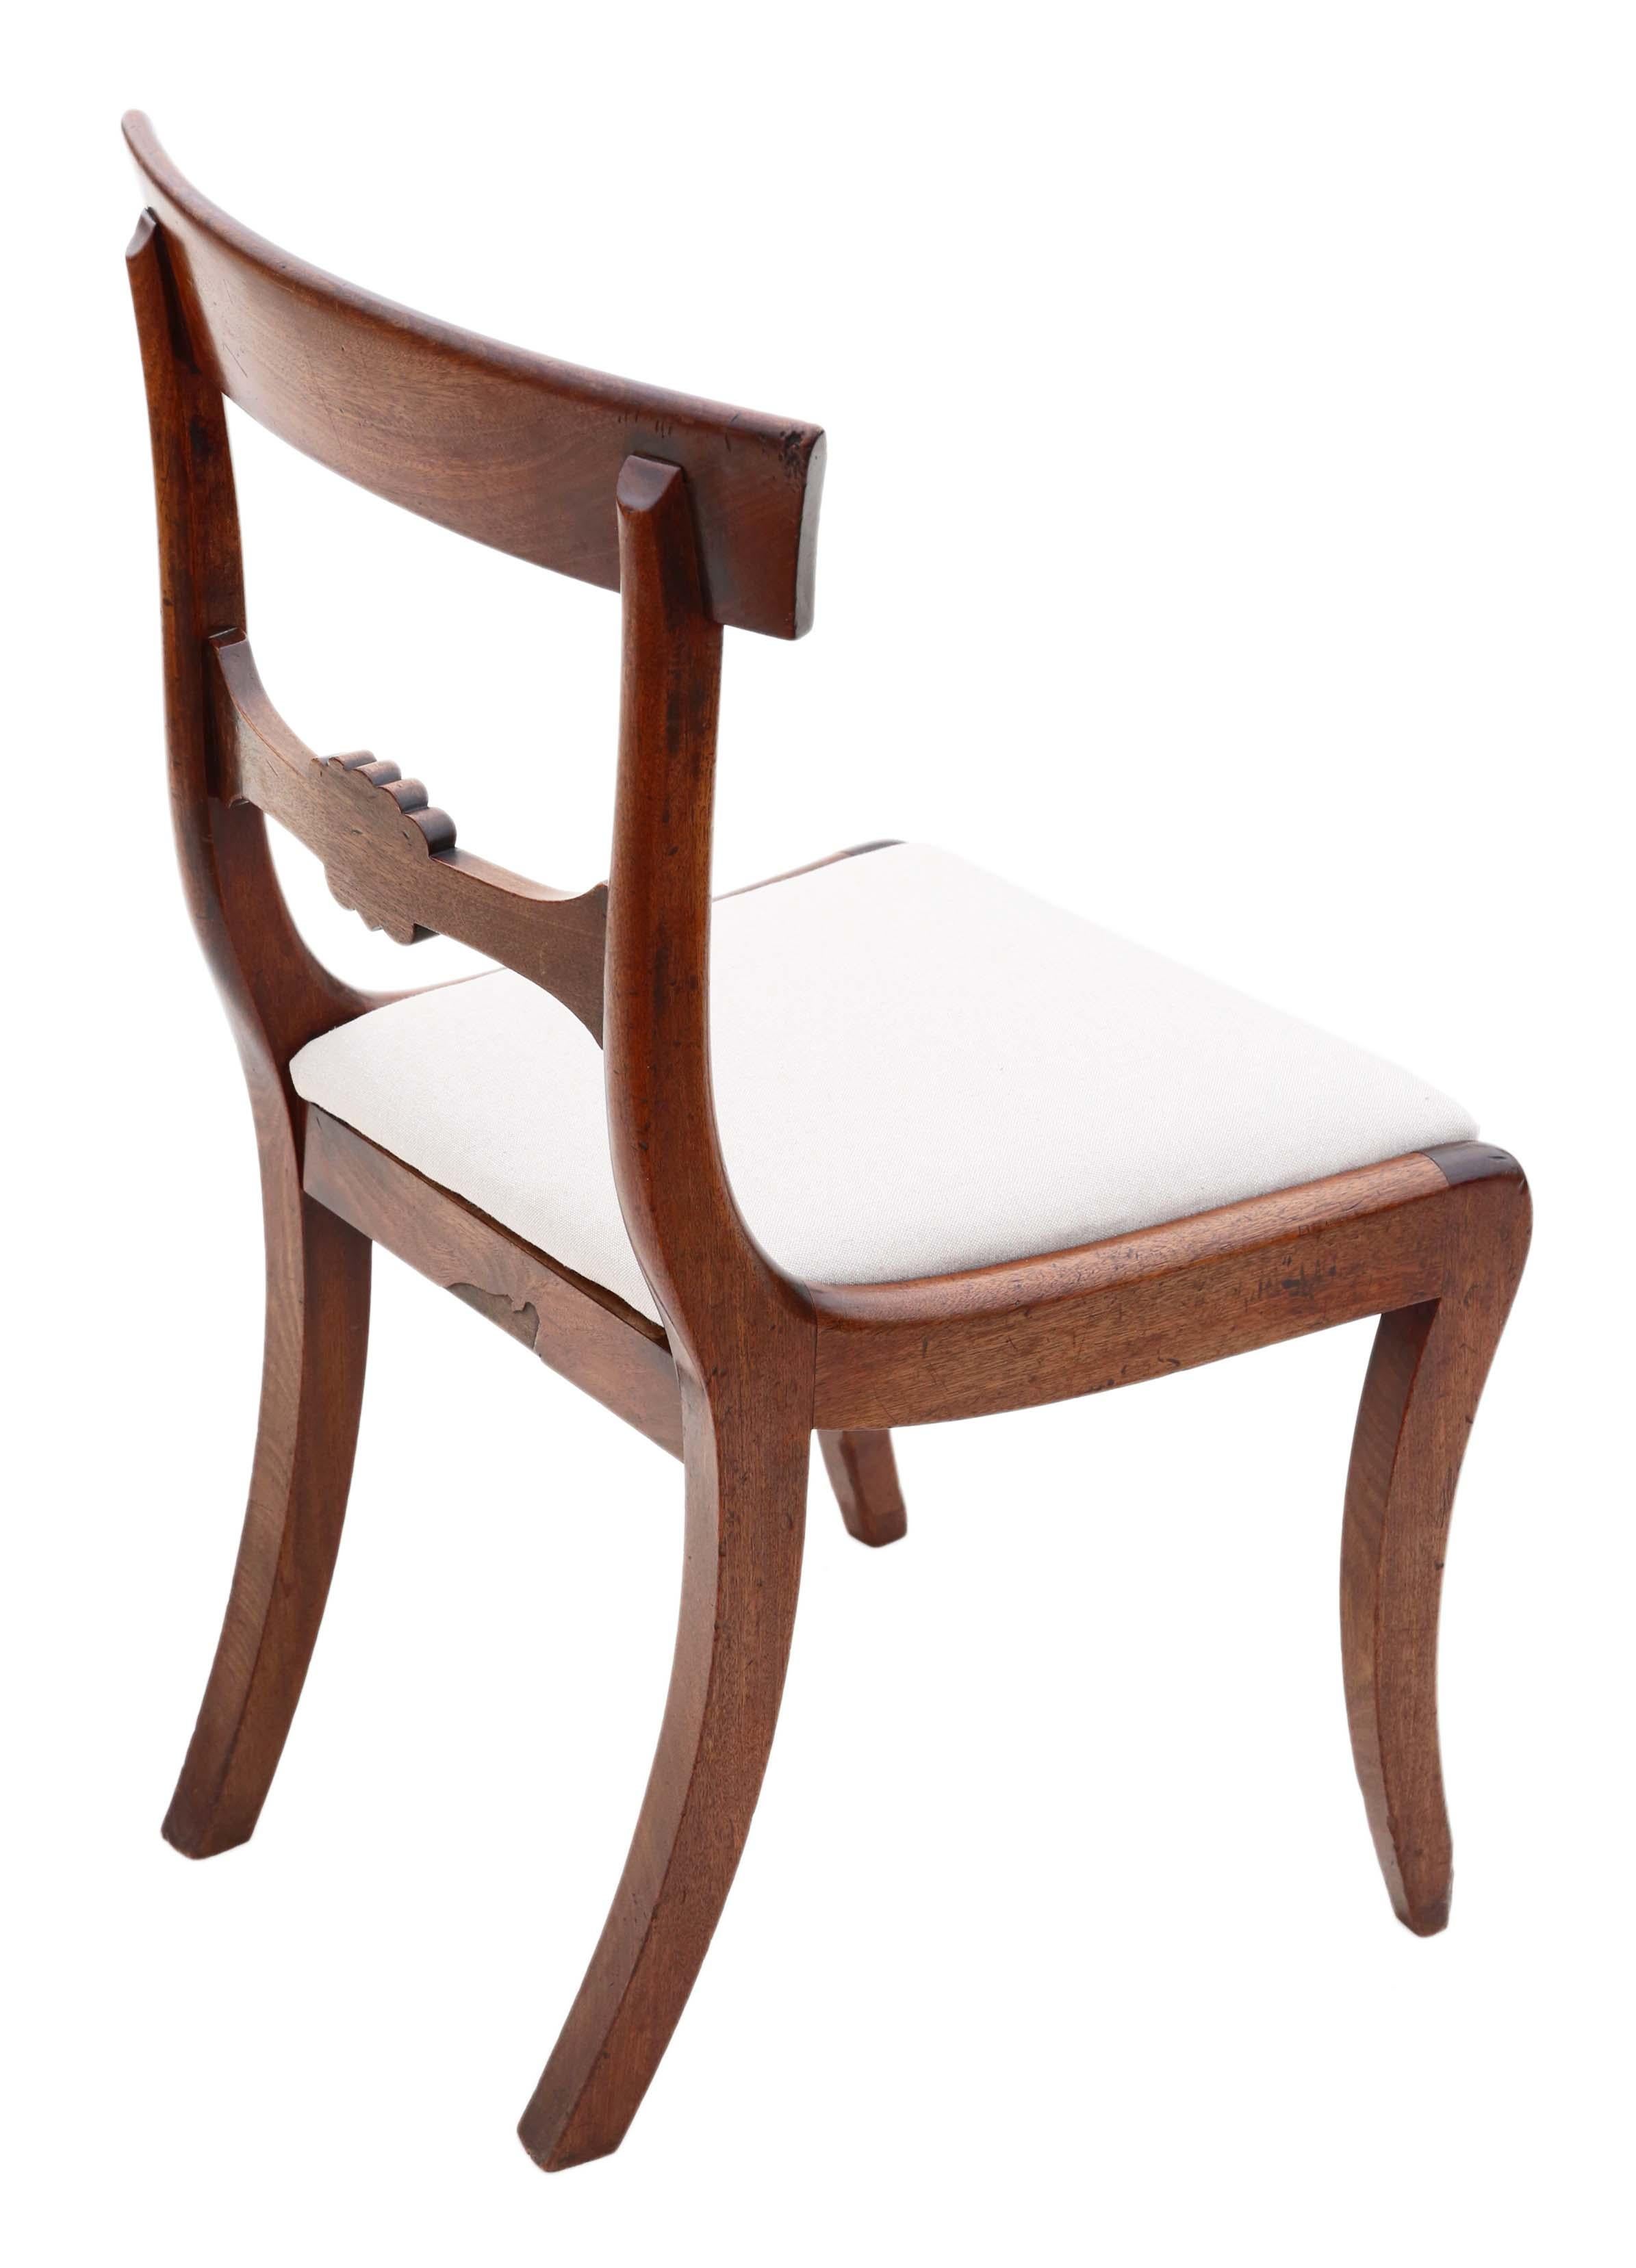 Regency Cuban Mahogany Dining Chairs: Set of 6 (4+2), Antique Quality, C1825 For Sale 9